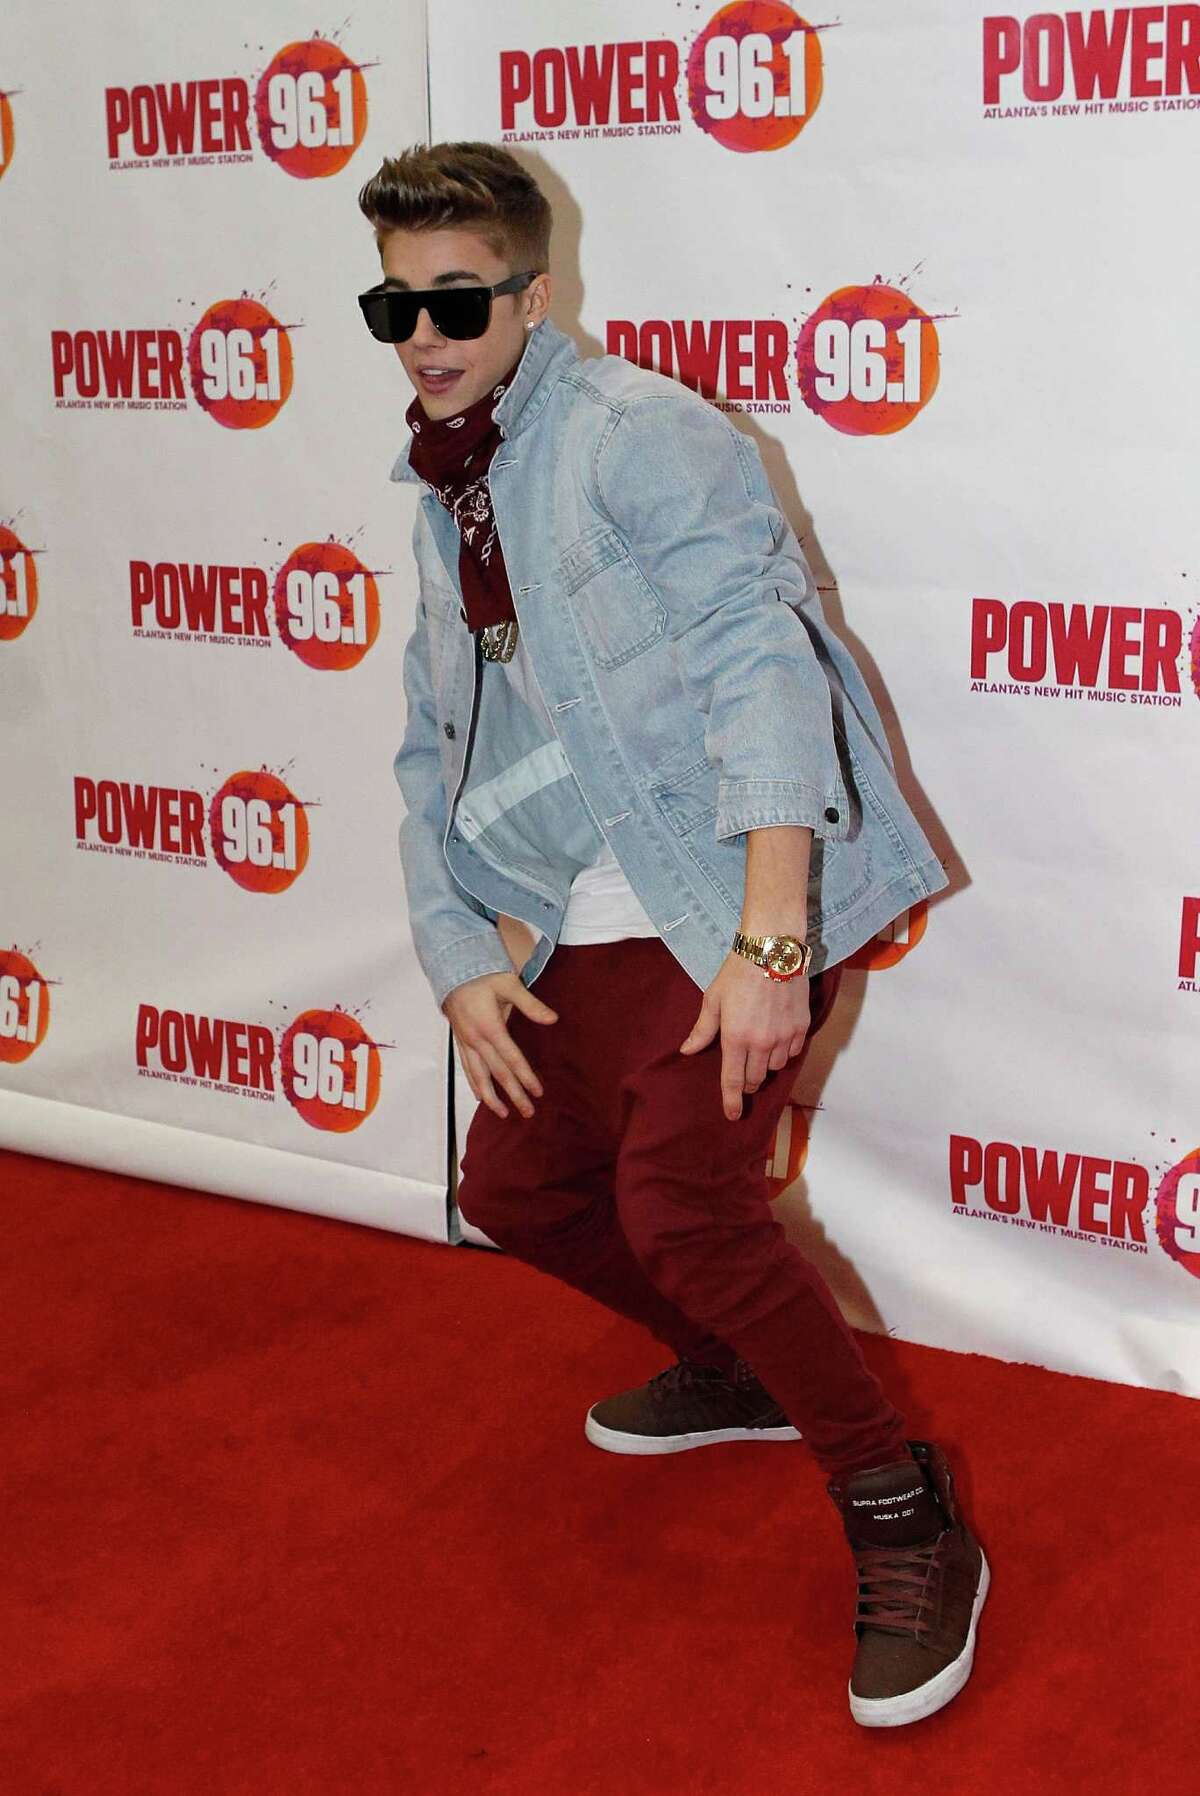 Justin Bieber attends Power 96.1's Jingle Ball 2012 at the Philips Arena on December 12, 2012 in Atlanta.